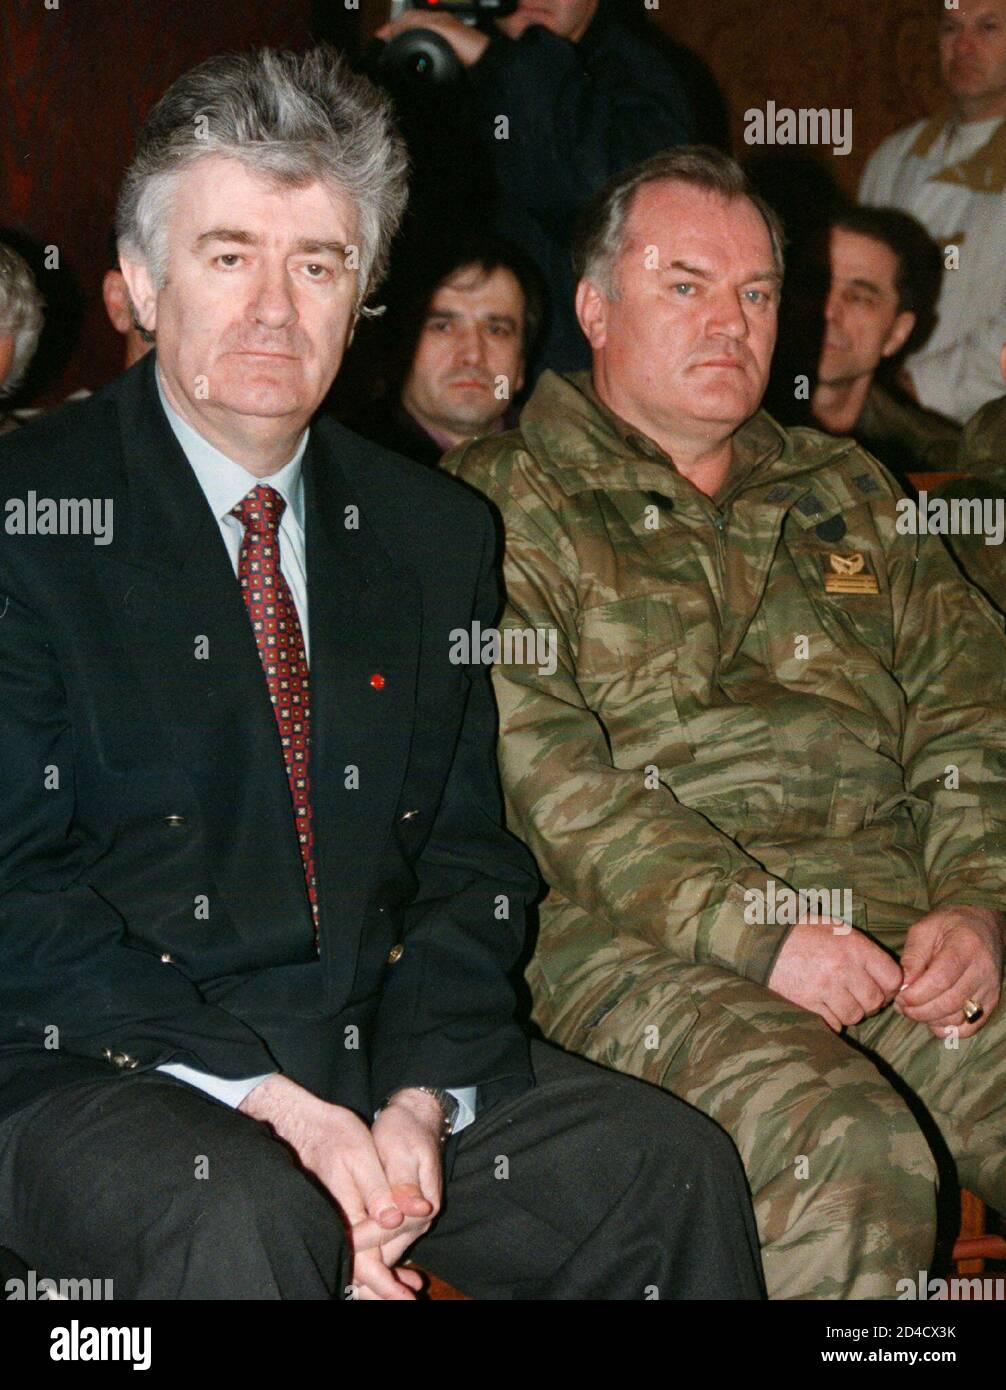 Nato Said On December 12 2001 That Its Bosnian Peace Force Would Step Up Efforts To Arrest Bosnian Serb Wartime Leader Radovan Karadzic And His Military Commander Ratko Mladic The U N War